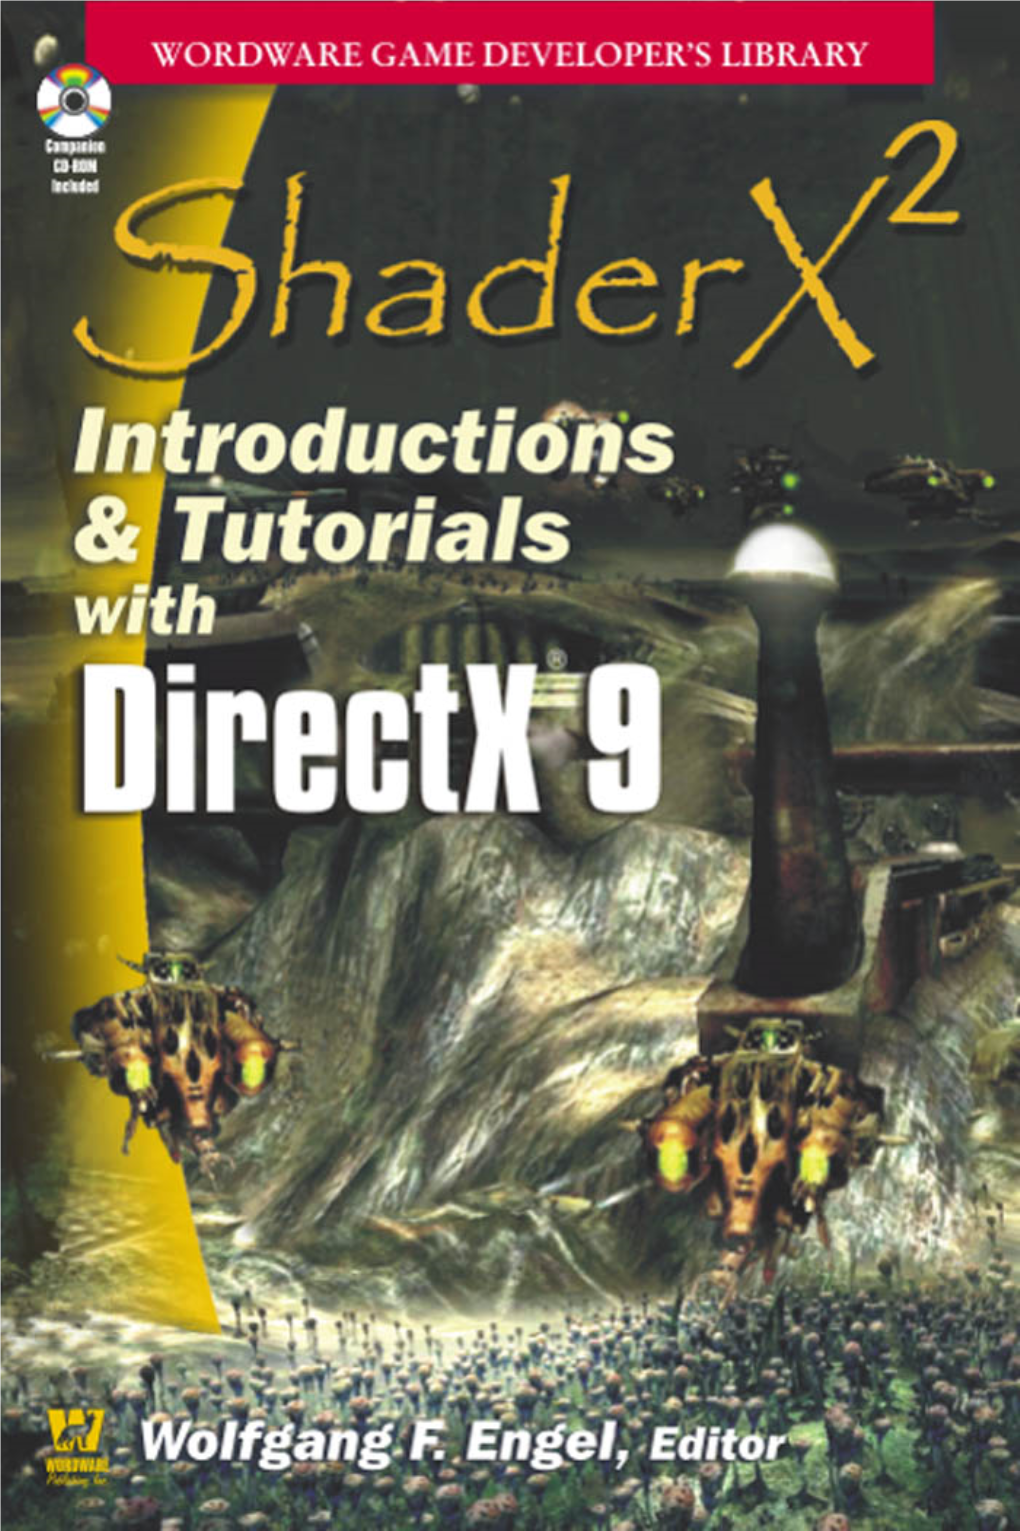 Shaderx2 Introductions & Tutorials with Directx 9